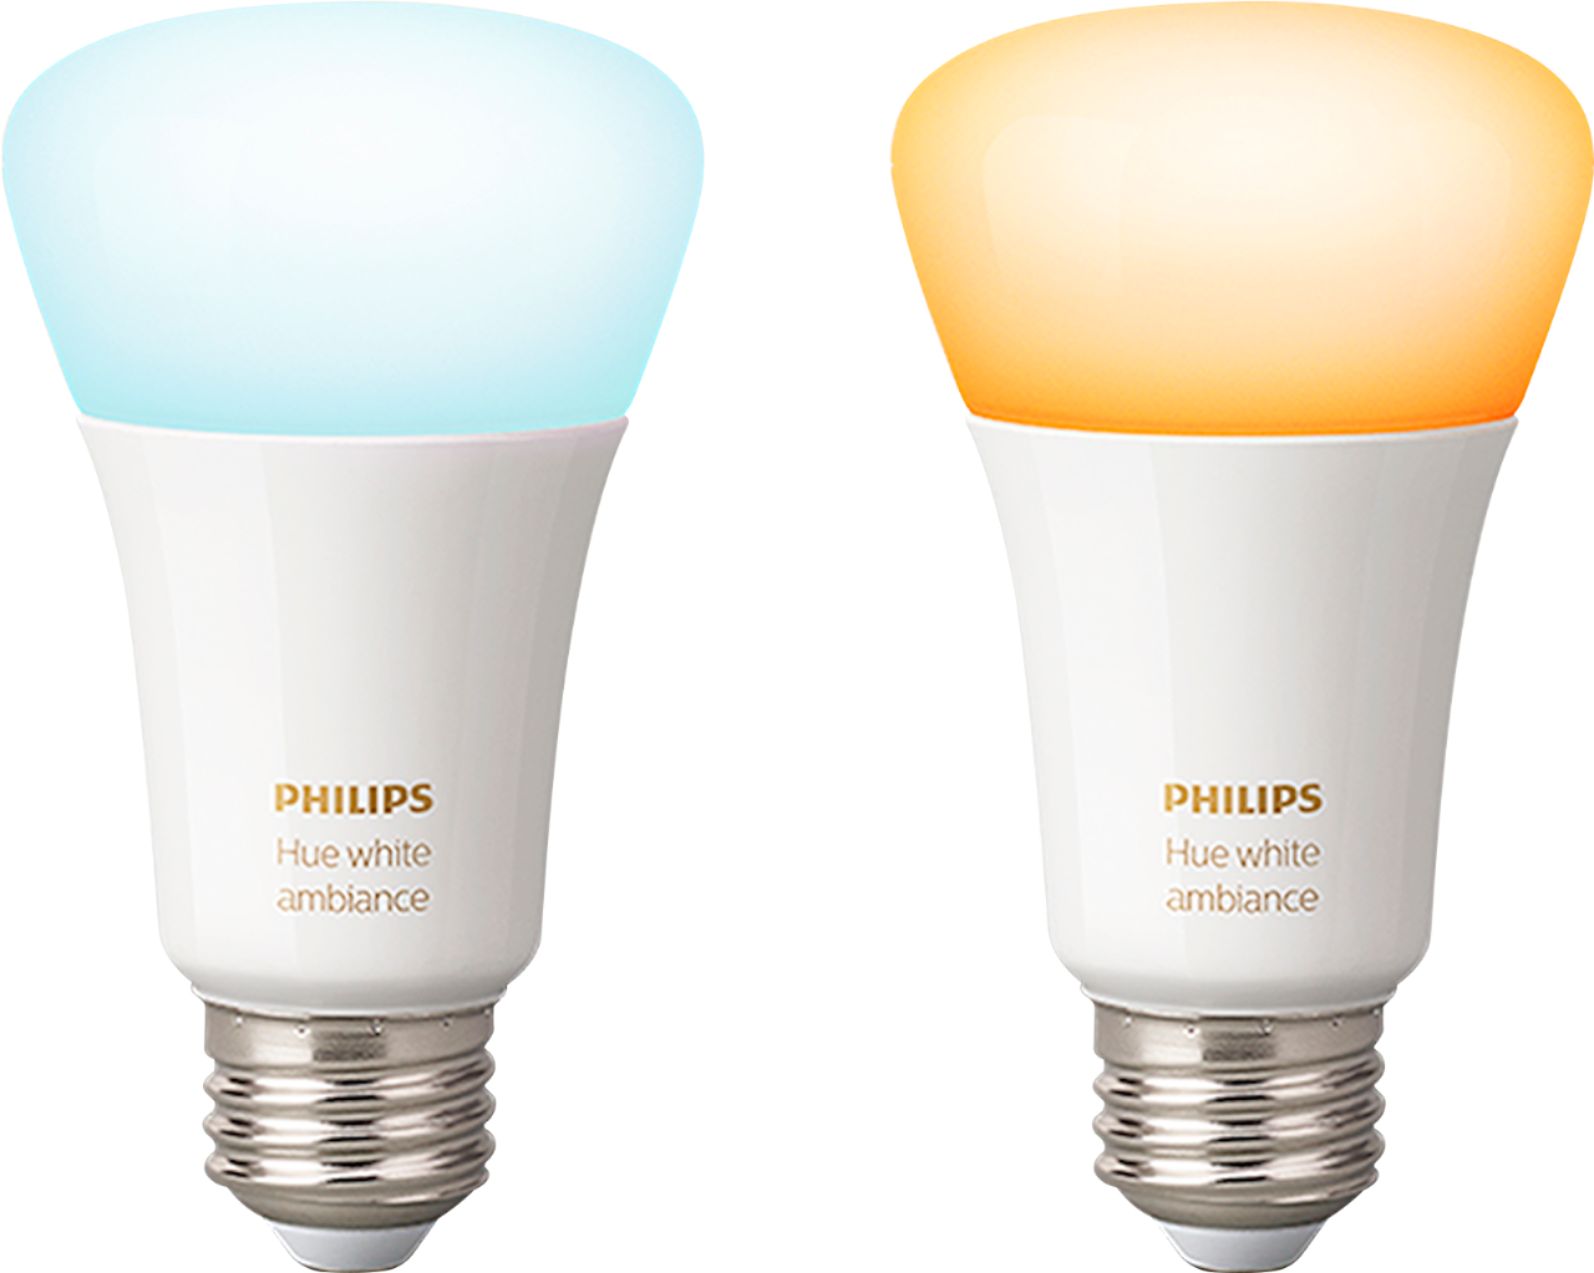 2-Pack - 548560 Philips VG Hue White Ambiance A19 Bluetooth Smart LED Bulb 